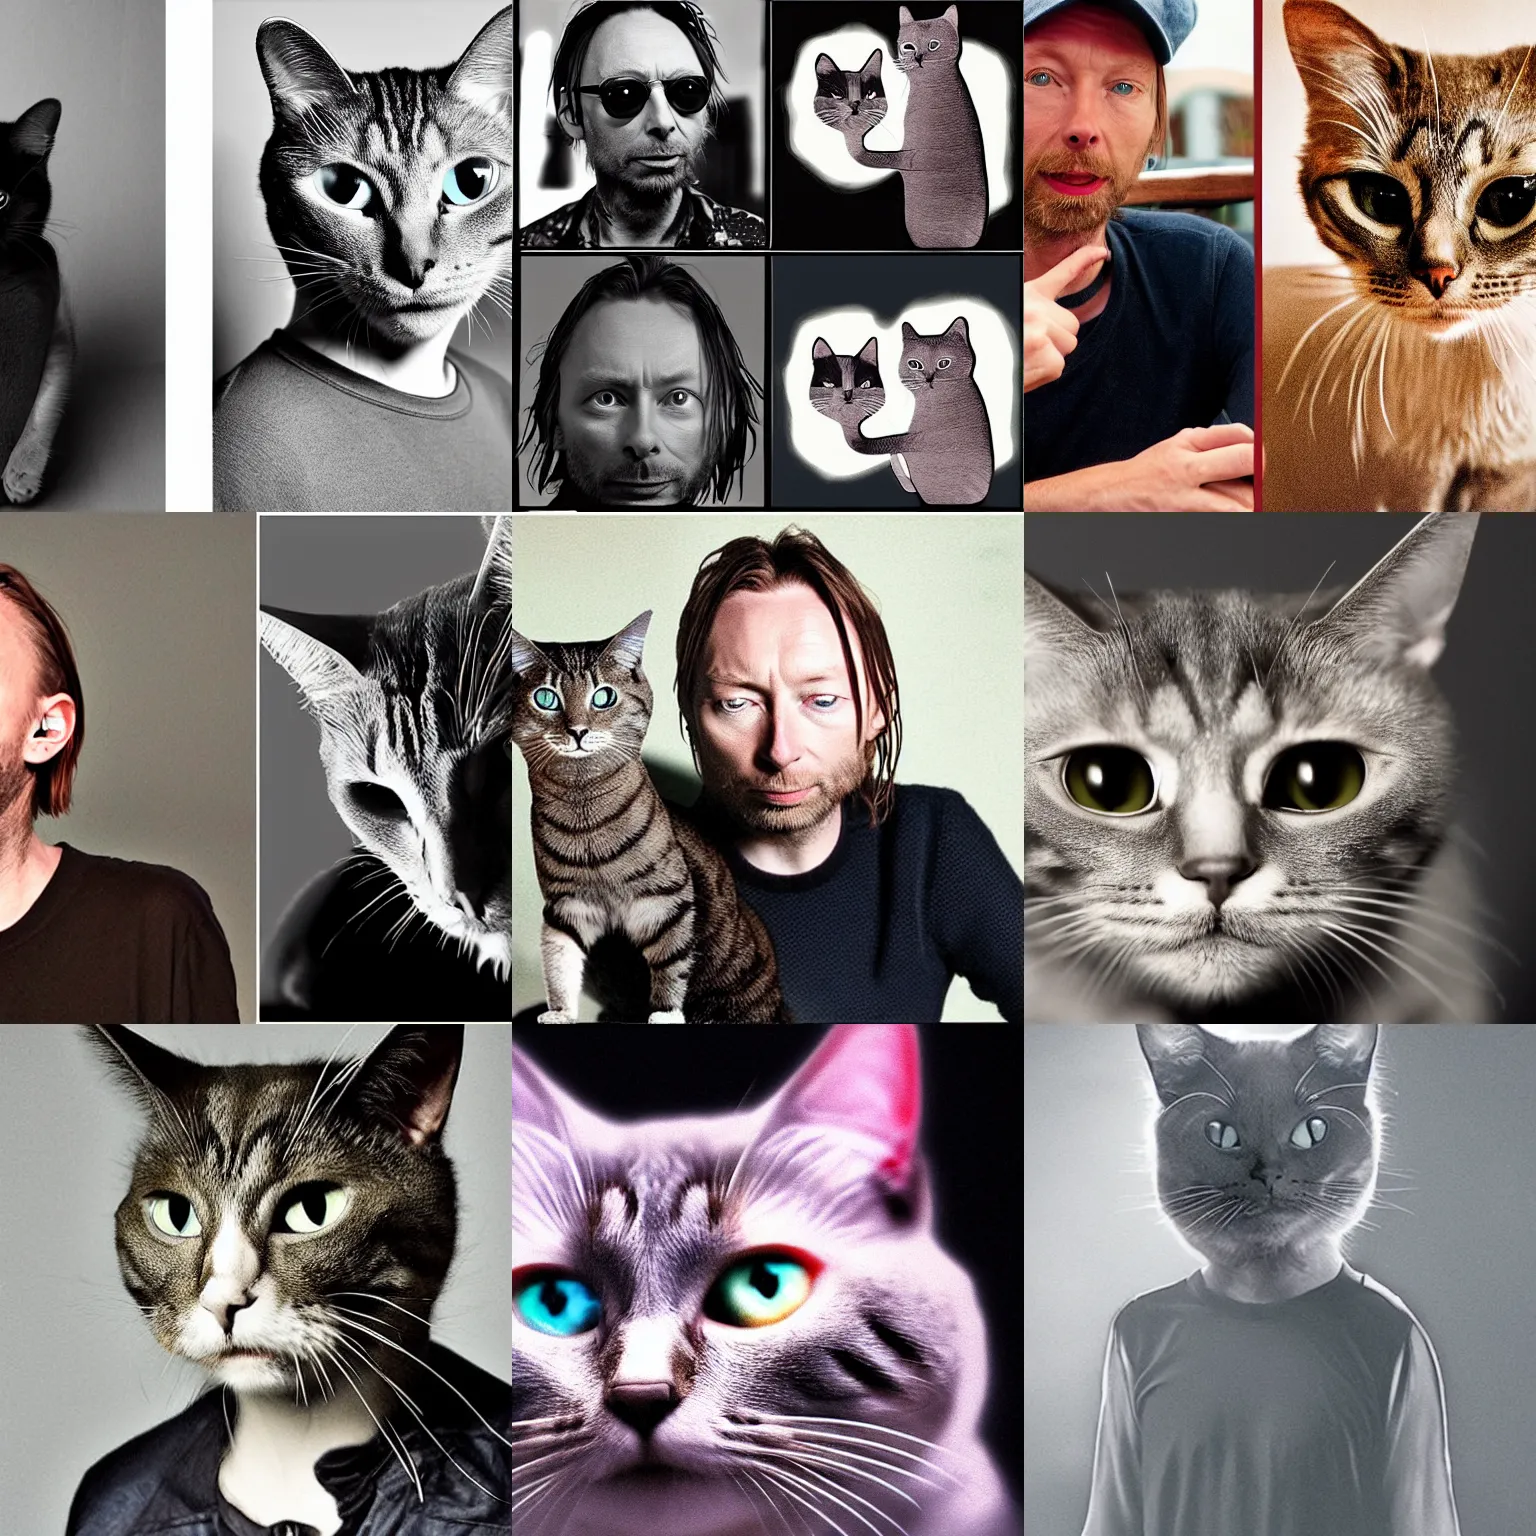 Prompt: Thom Yorke as a cat, Radiohead singer as a cat